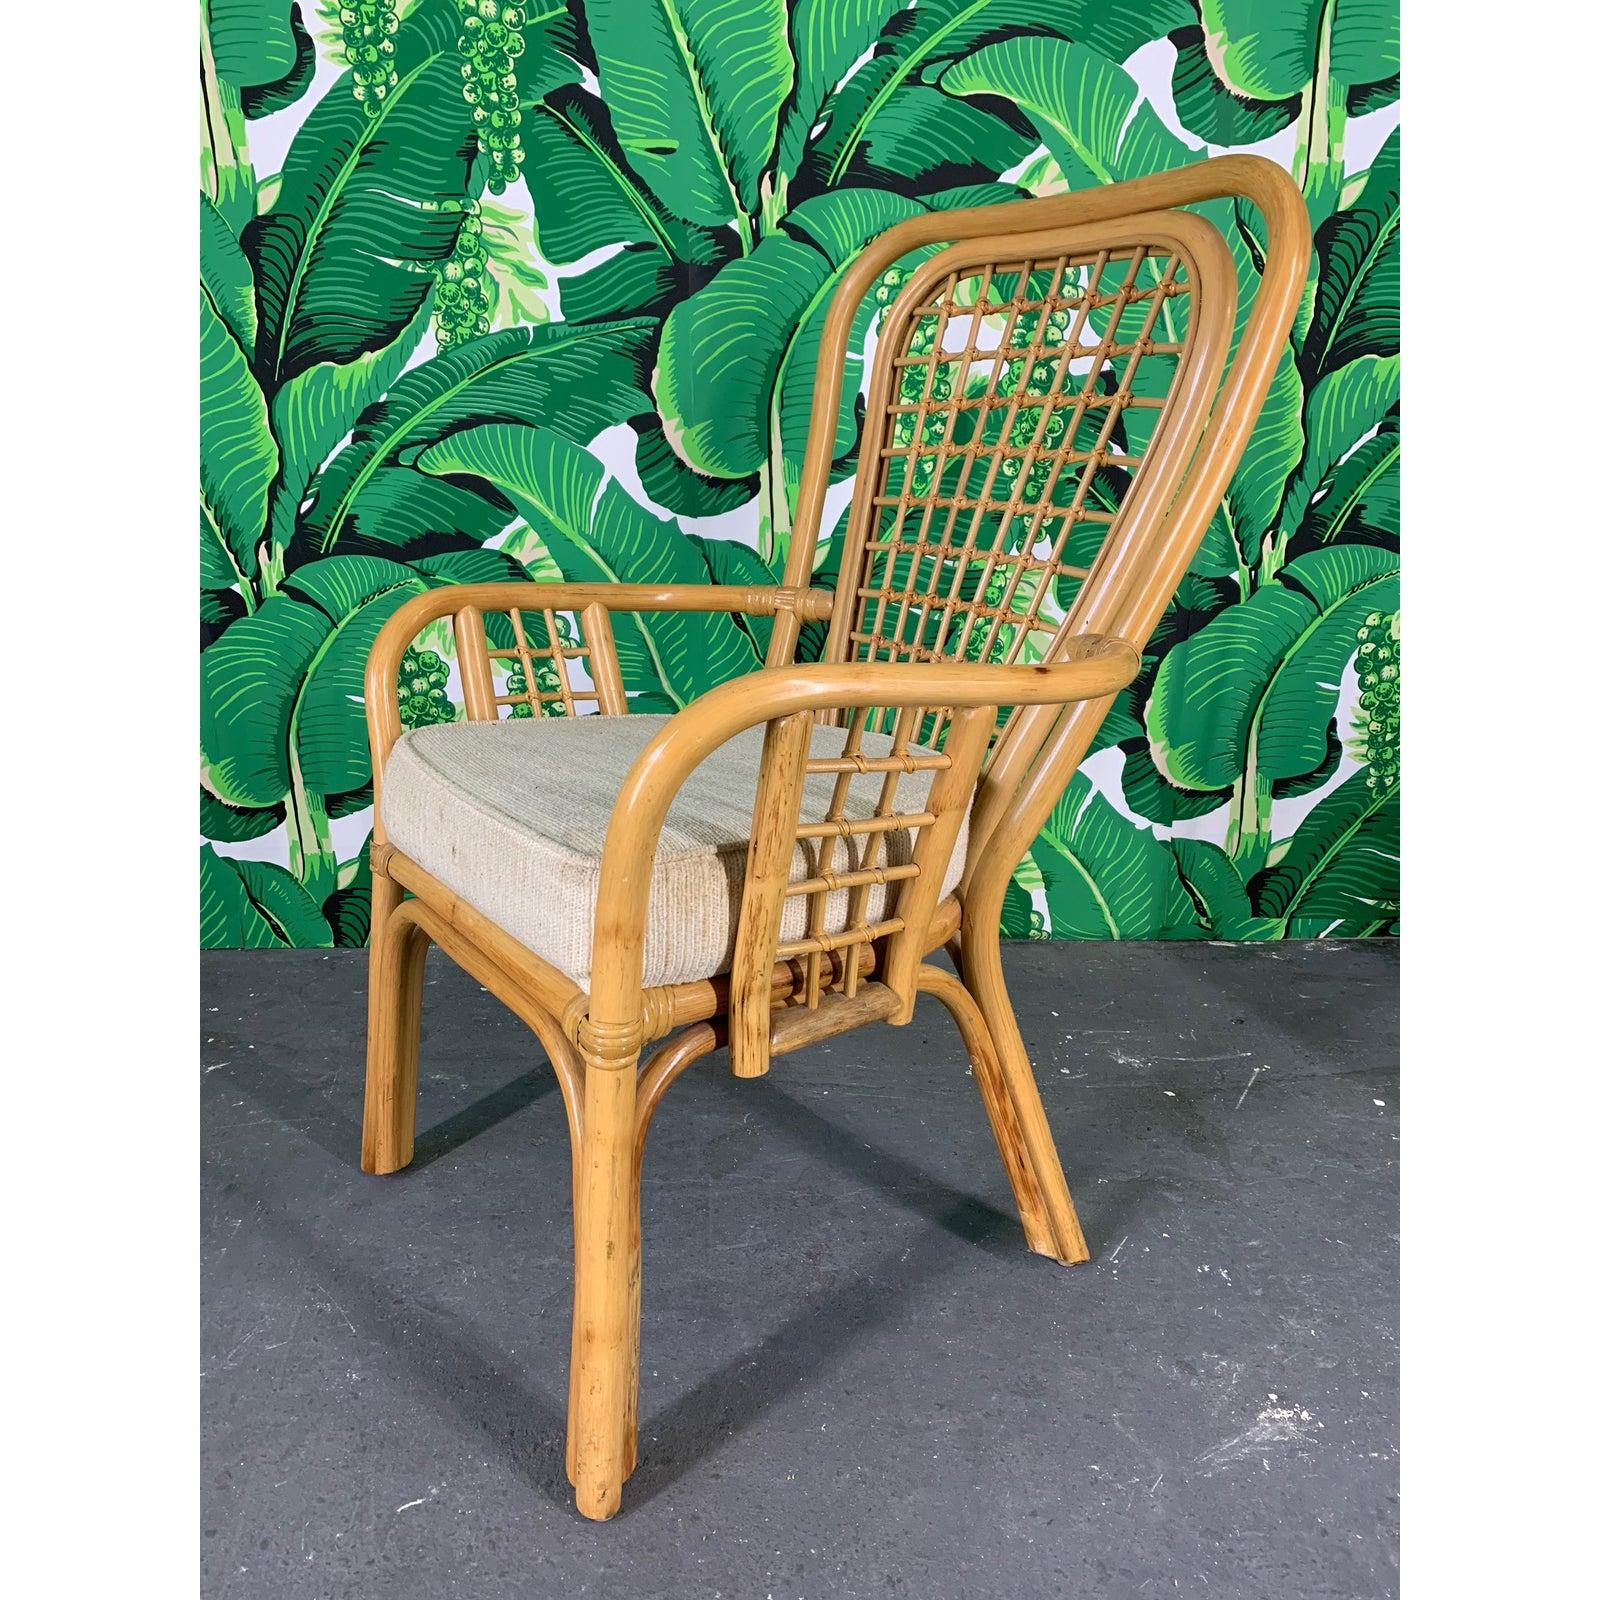 Set of 4 rattan dining chairs feature a fan back design and thick, upholstered seats. Very good vintage condition with only minor signs of age appropriate wear.